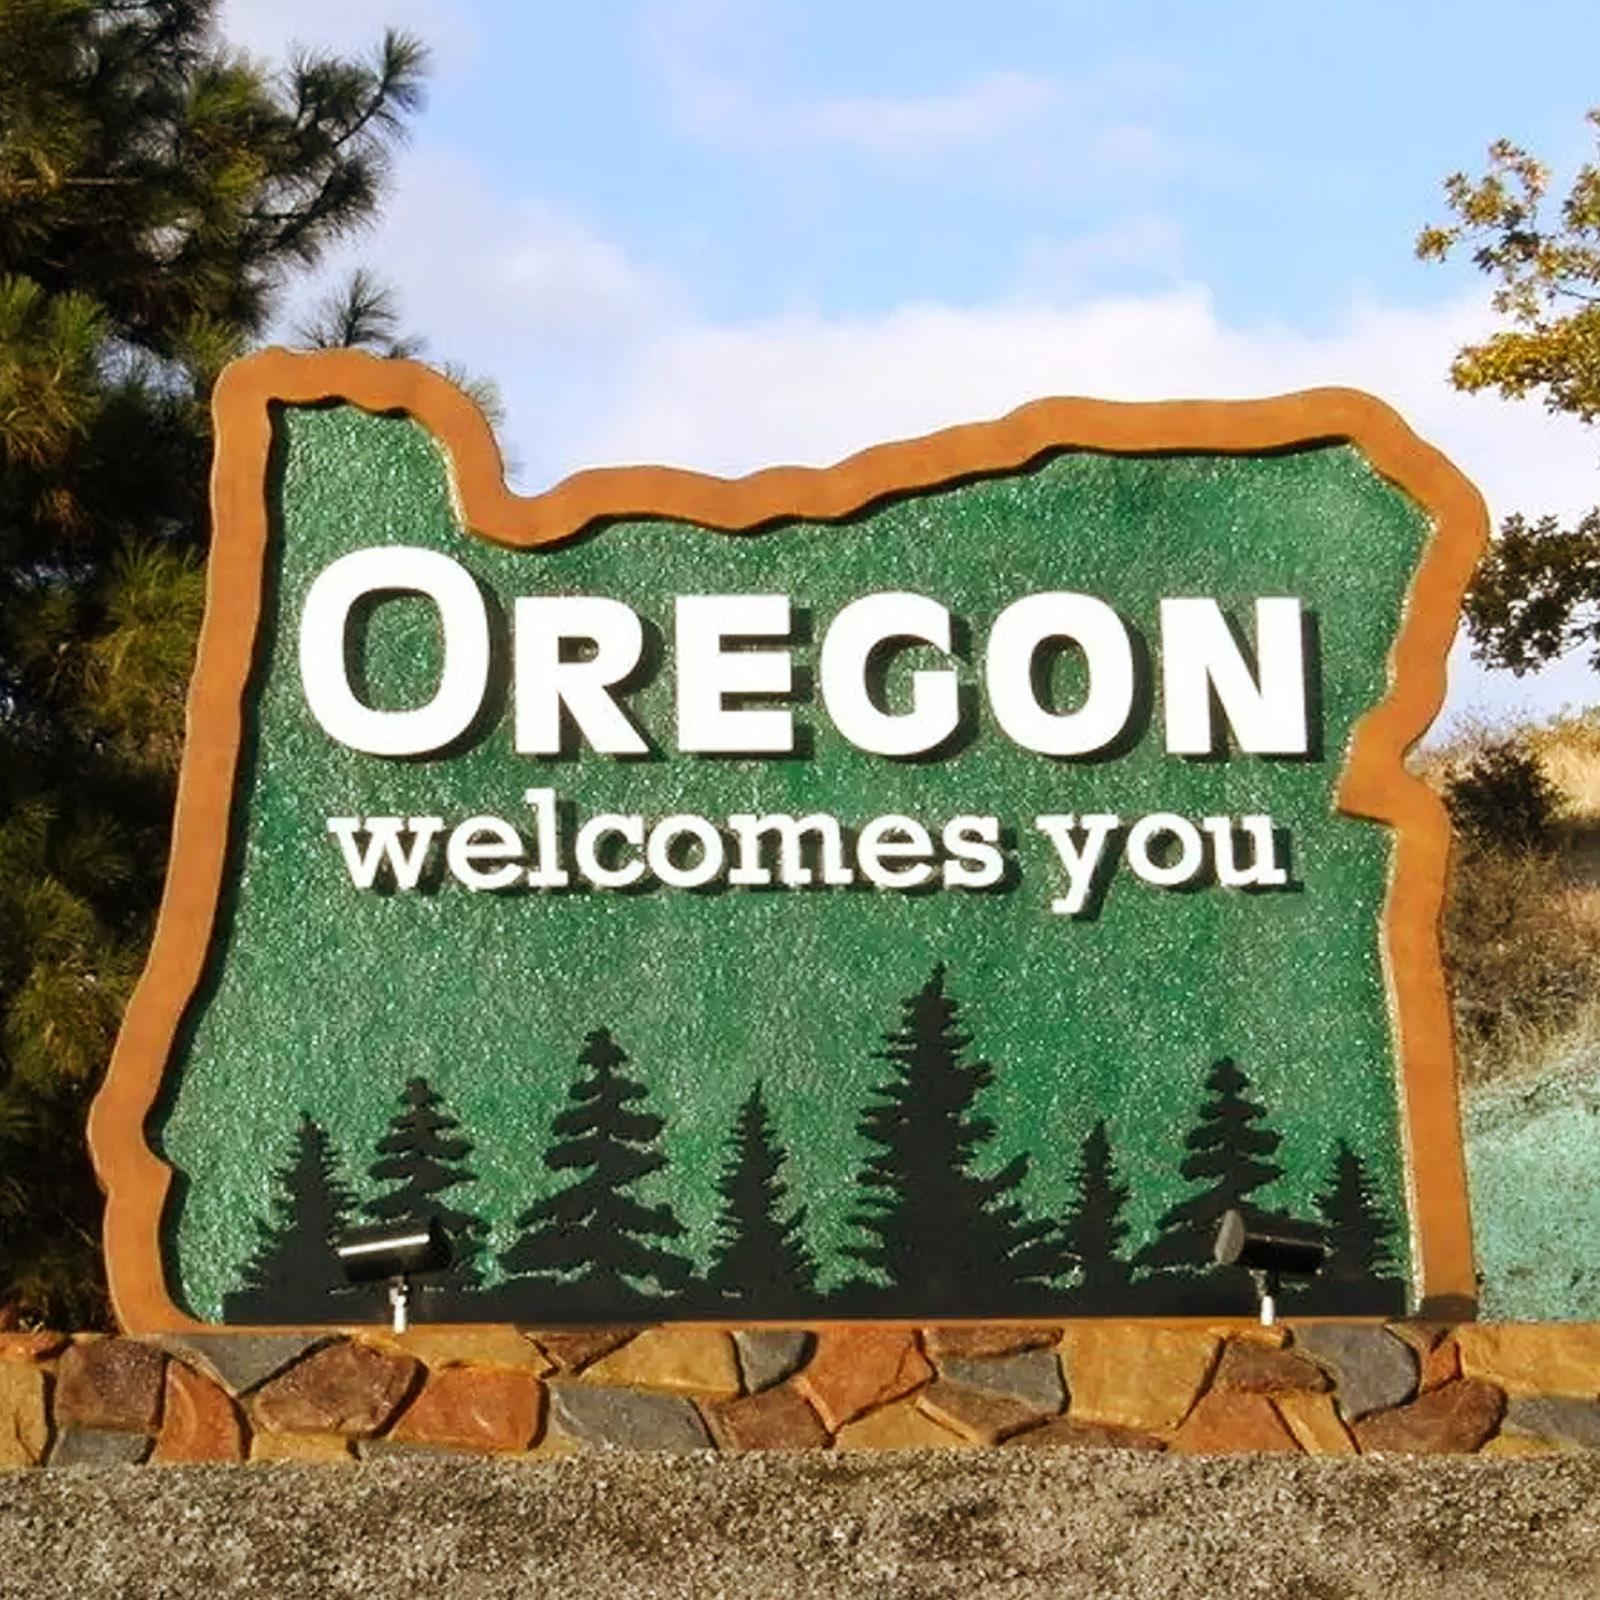 Sign in the shape of Oregon with the text ' Oregon welcomes you'